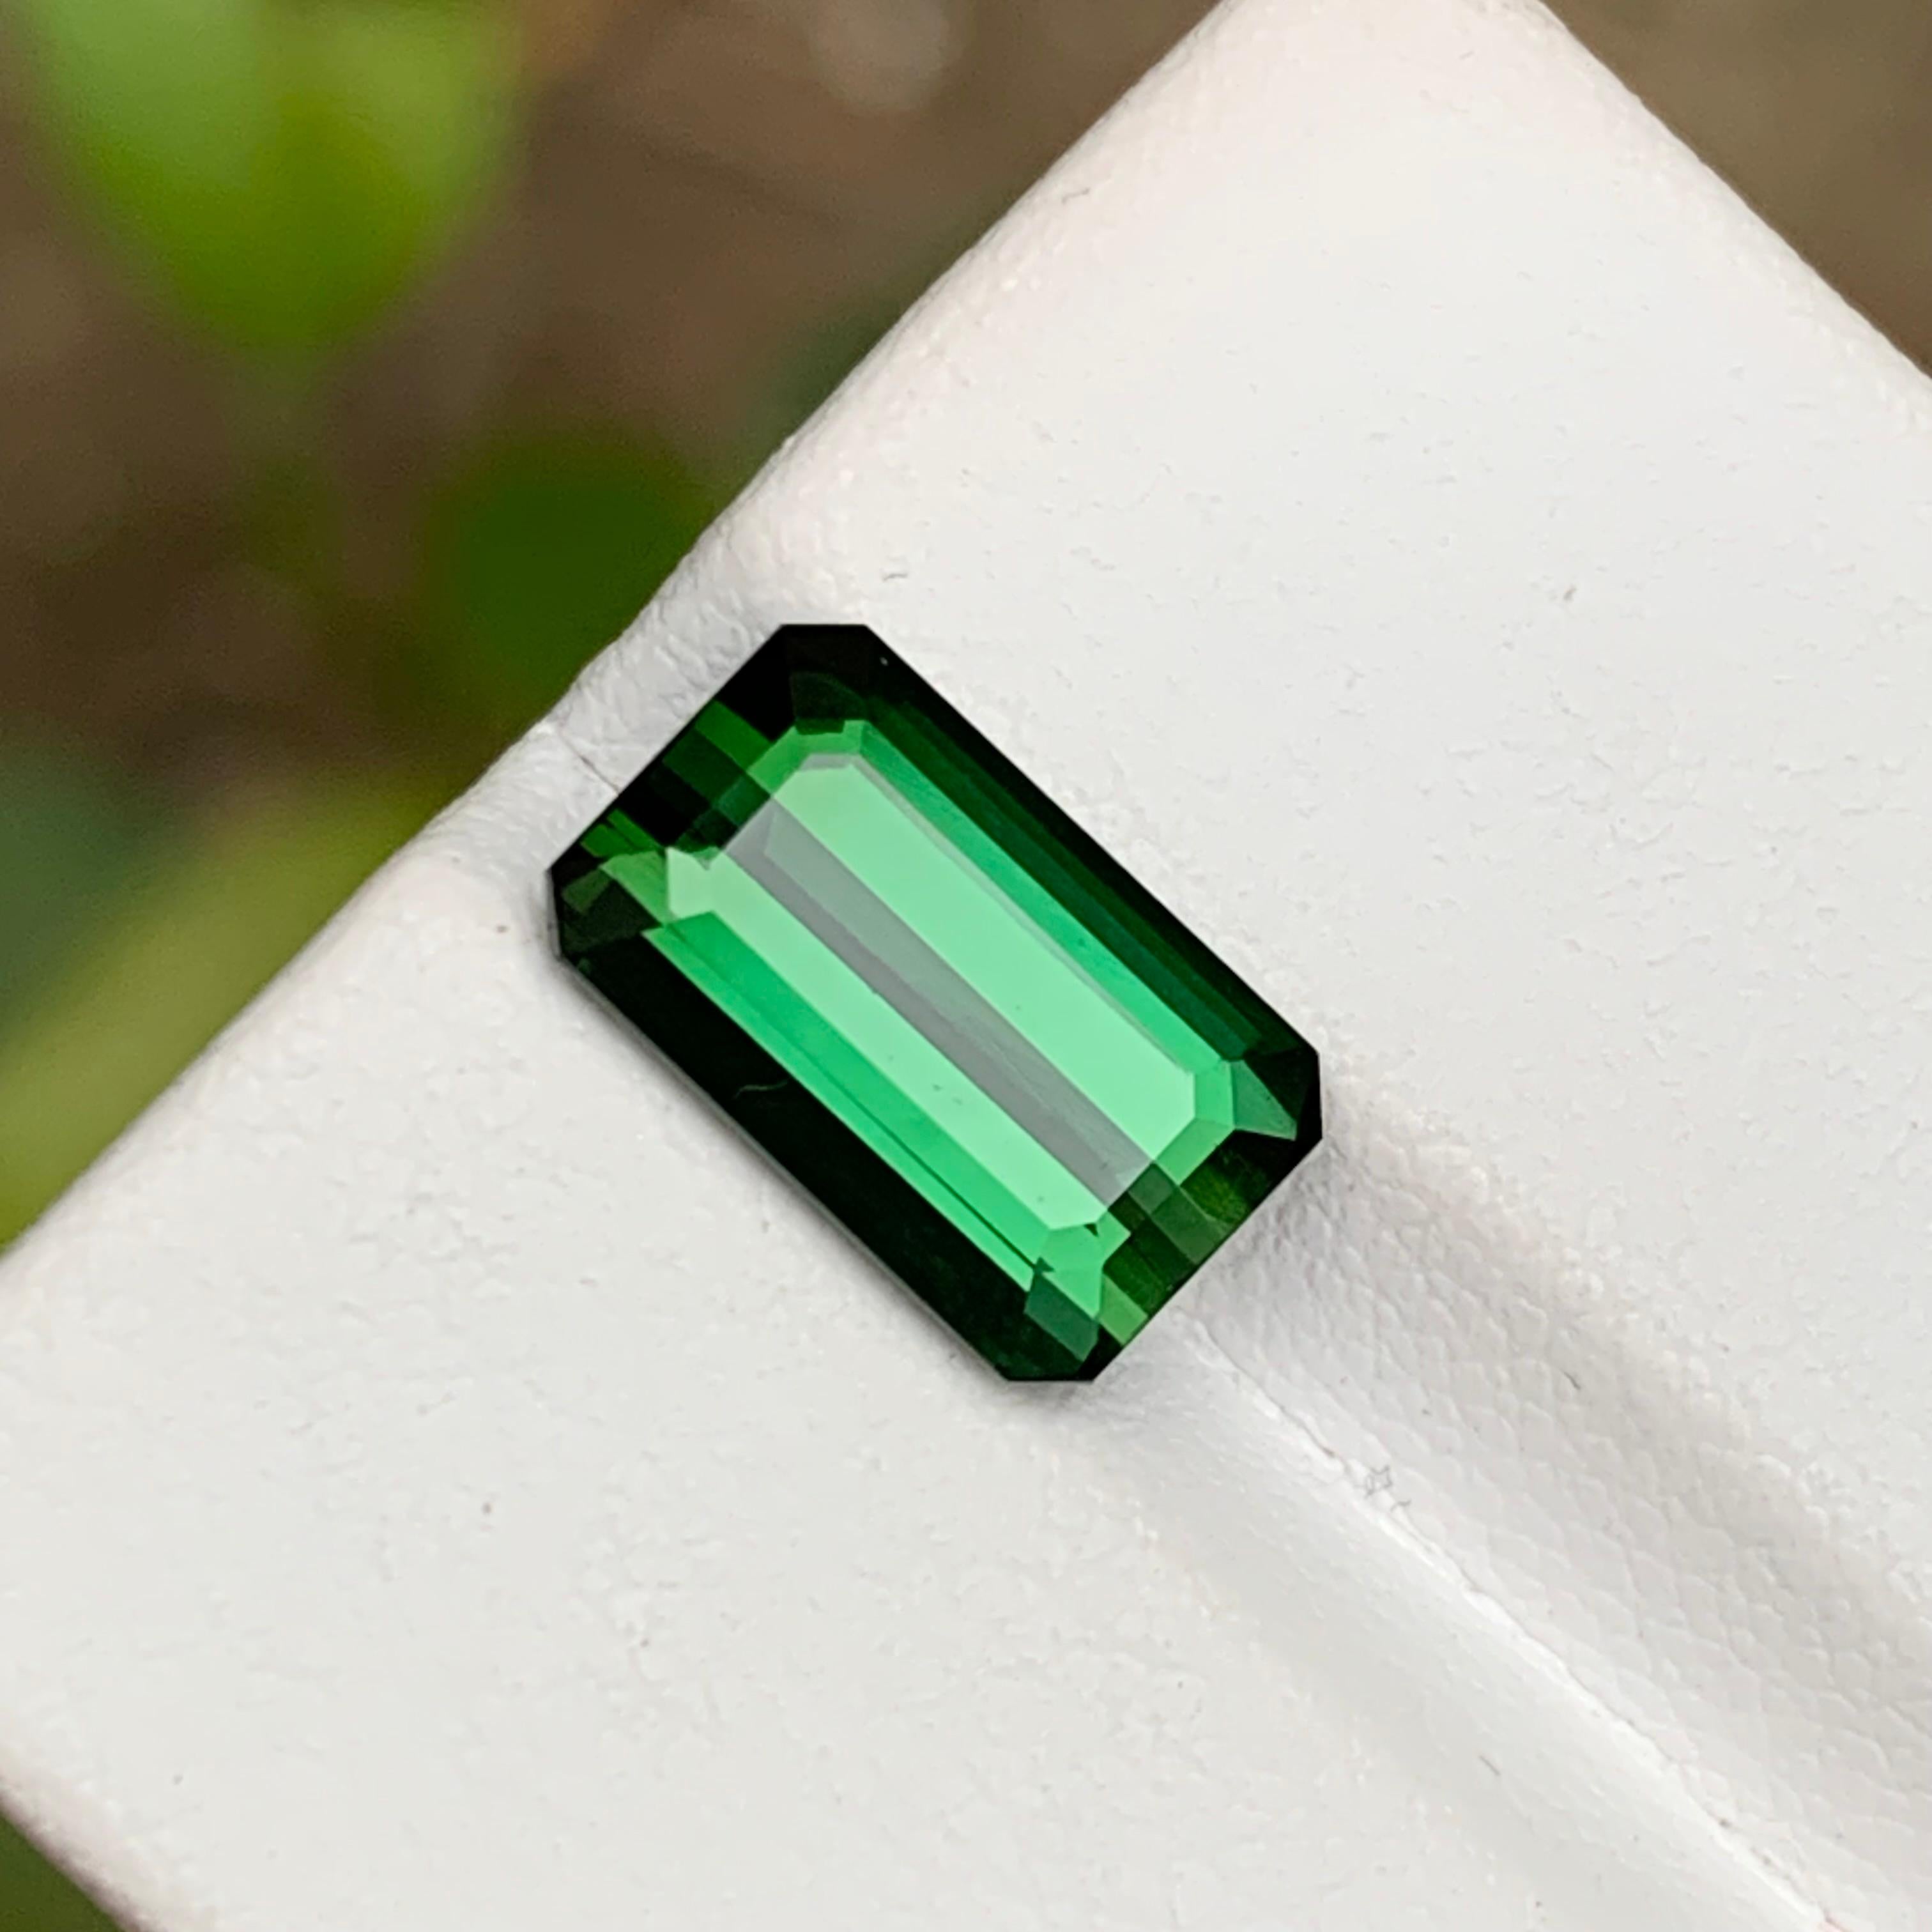 Contemporary Rare Deep Green Natural Tourmaline Loose Gemstone, 3.75 Ct Emerald Cut for Ring For Sale